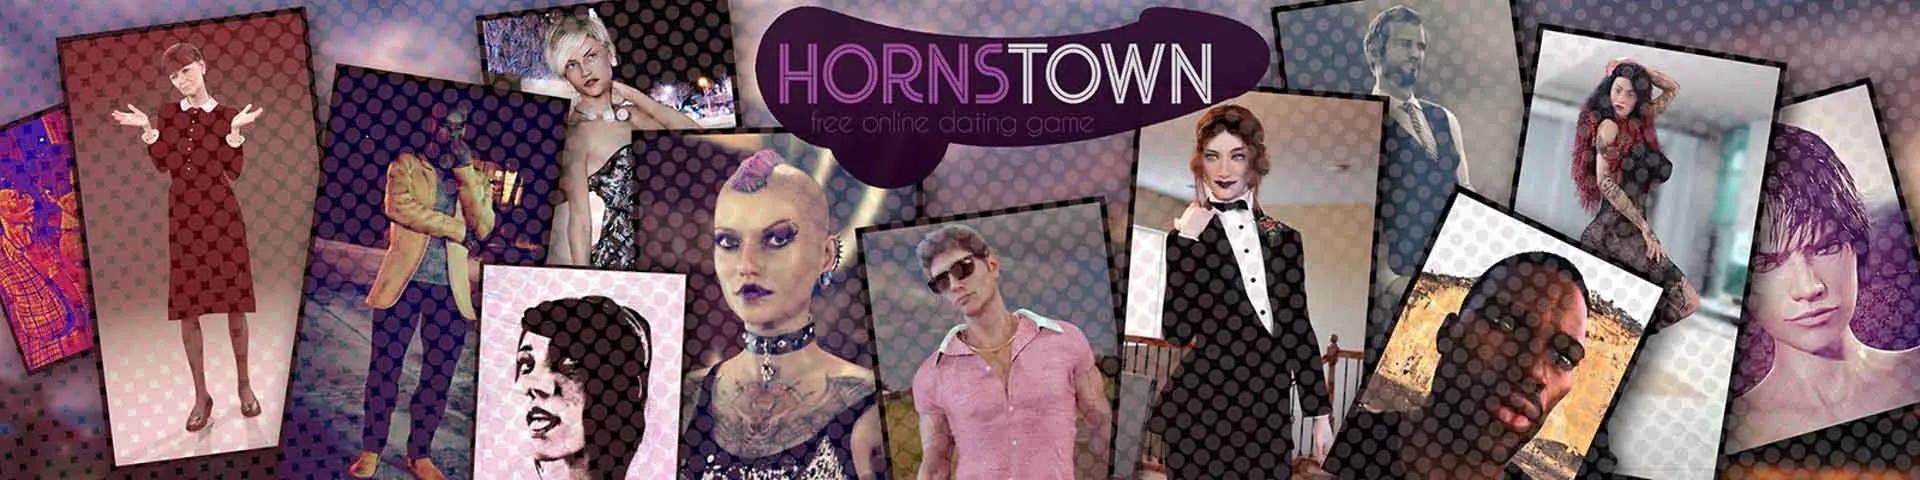 Hard Times in Hornstown 3d sex game, porn game, adult game